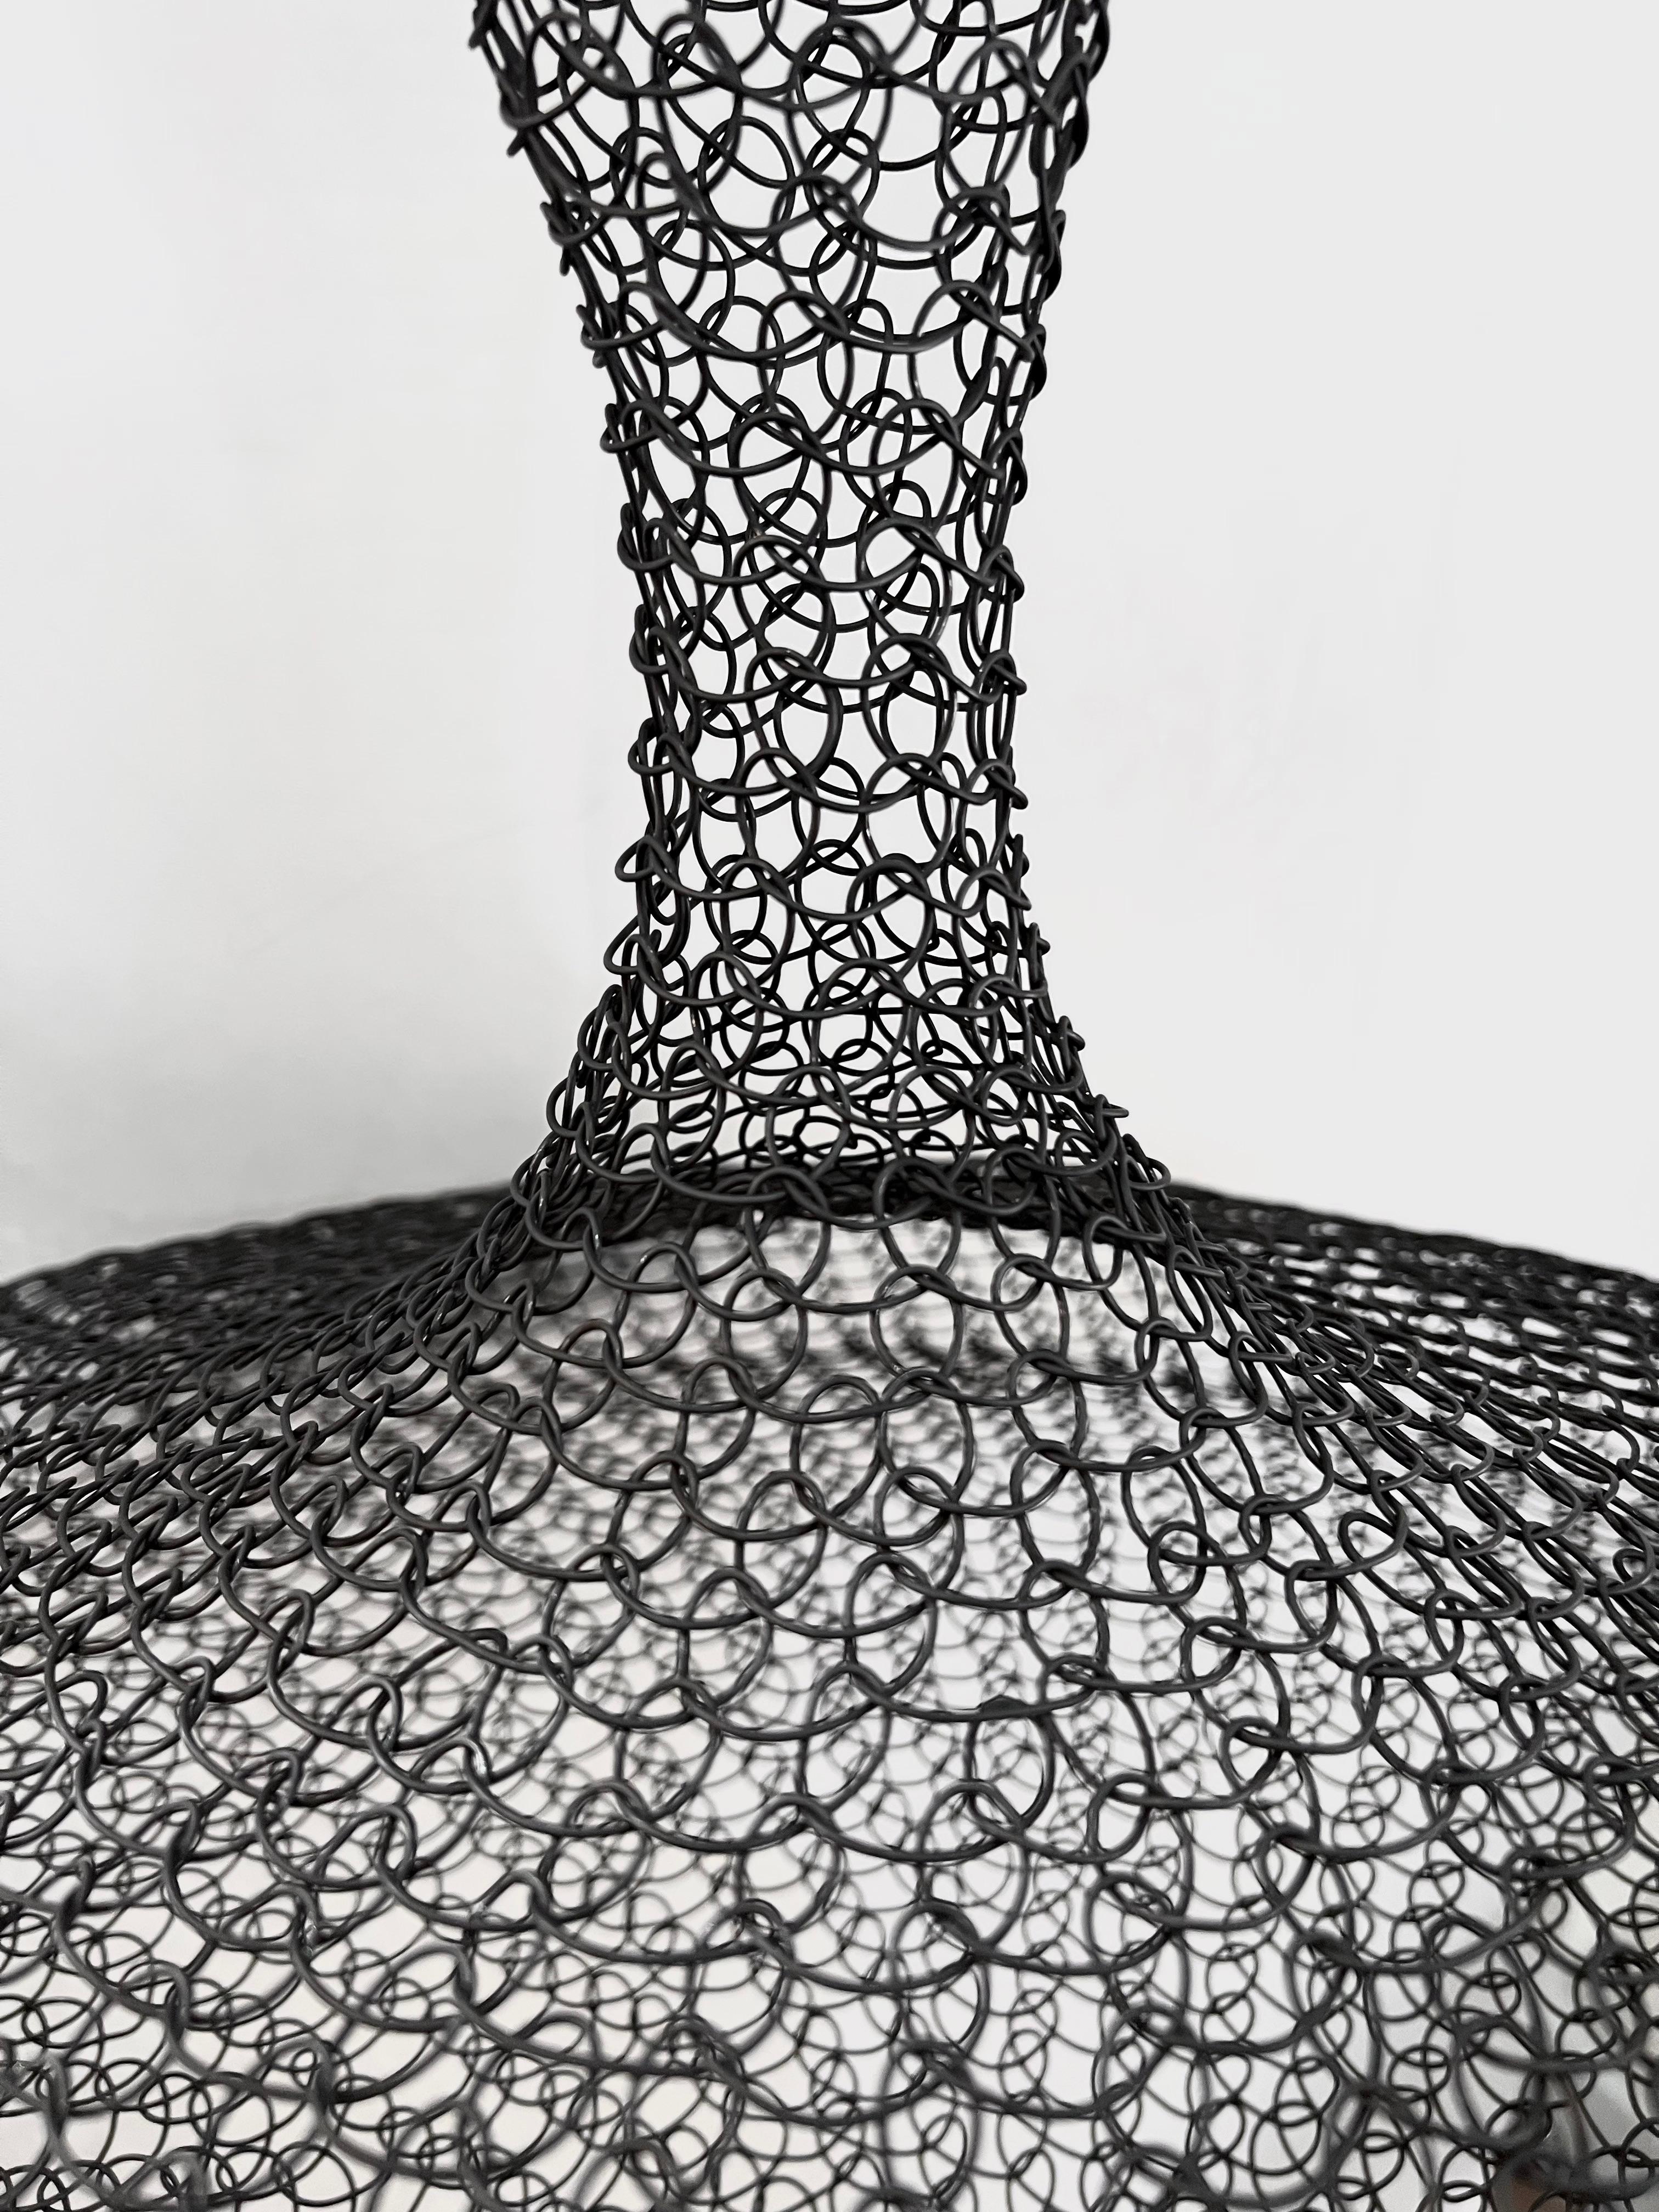 Organic Woven Mesh Wire Sculpture by Ulrikk Dufosse For Sale 4